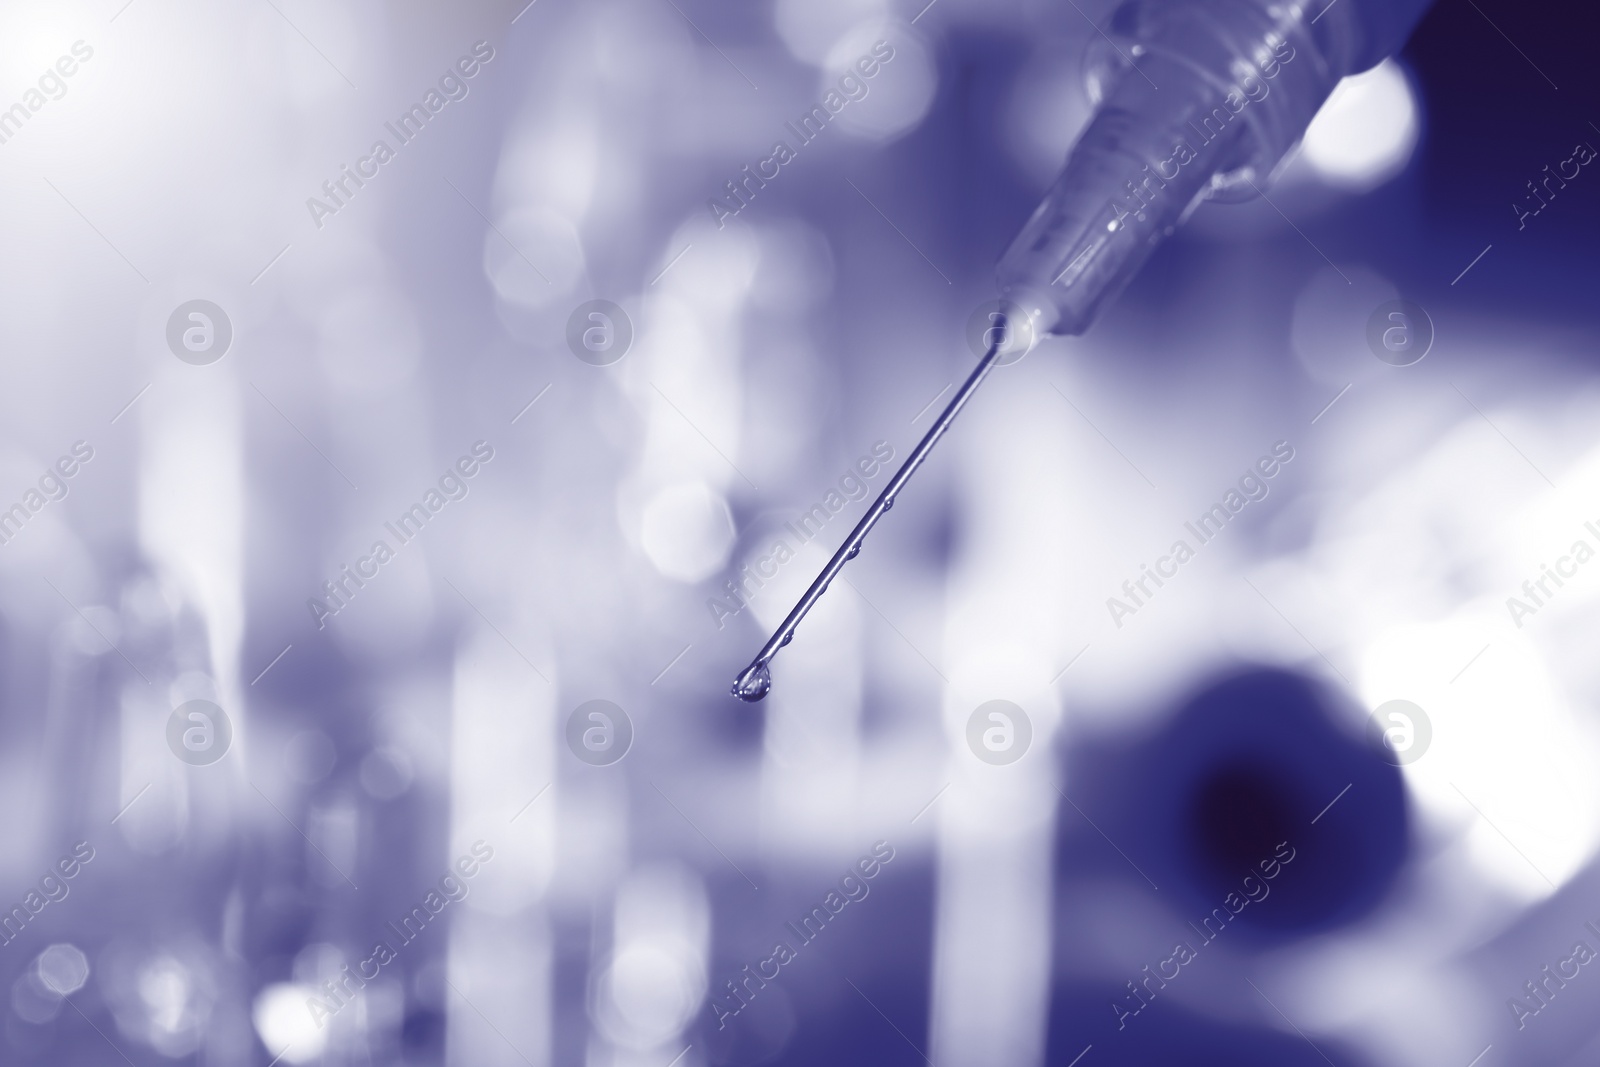 Image of Syringe with medicine against blurred background, toned in purple